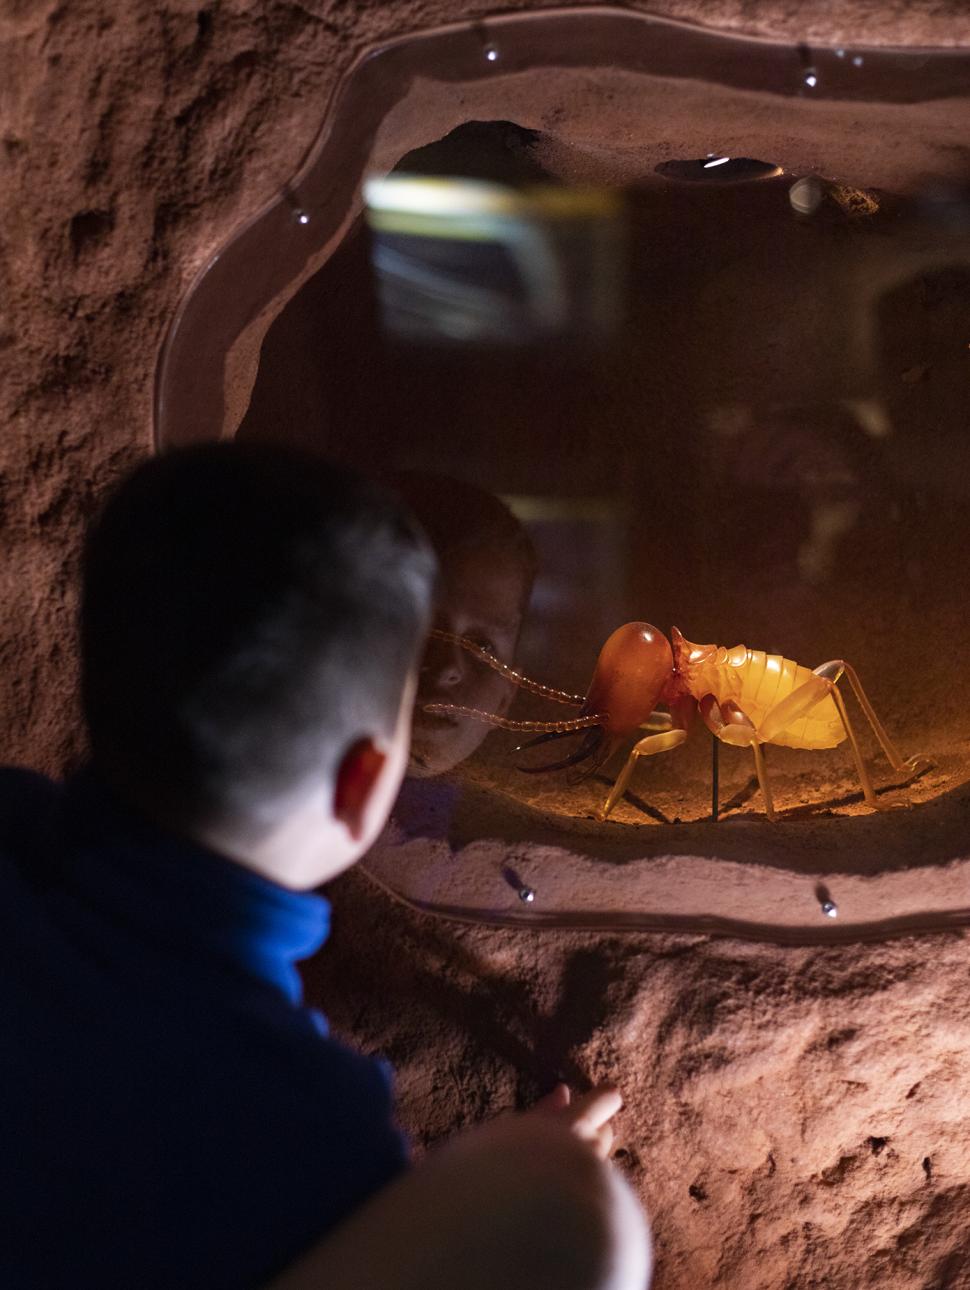 Boy stares through glass at giant ant